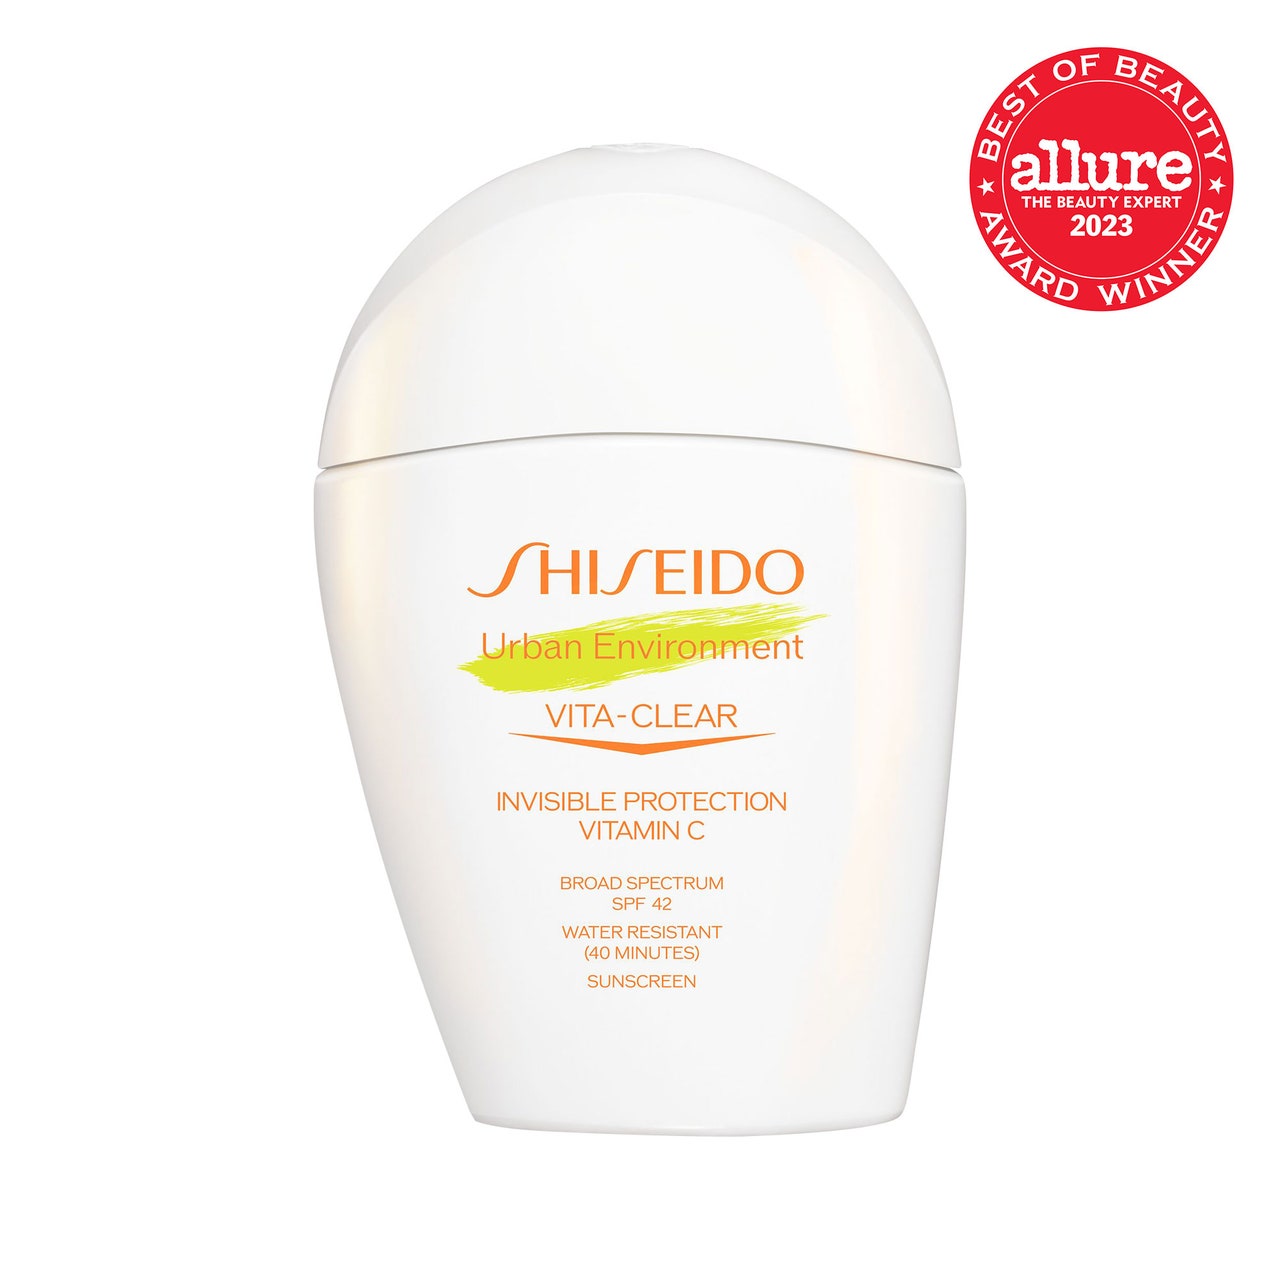 Shiseido Urban Environment Vita-Clear Sunscreen SPF 42 white bottle with rounded cap on white background with red Allure BoB seal in the top right corner